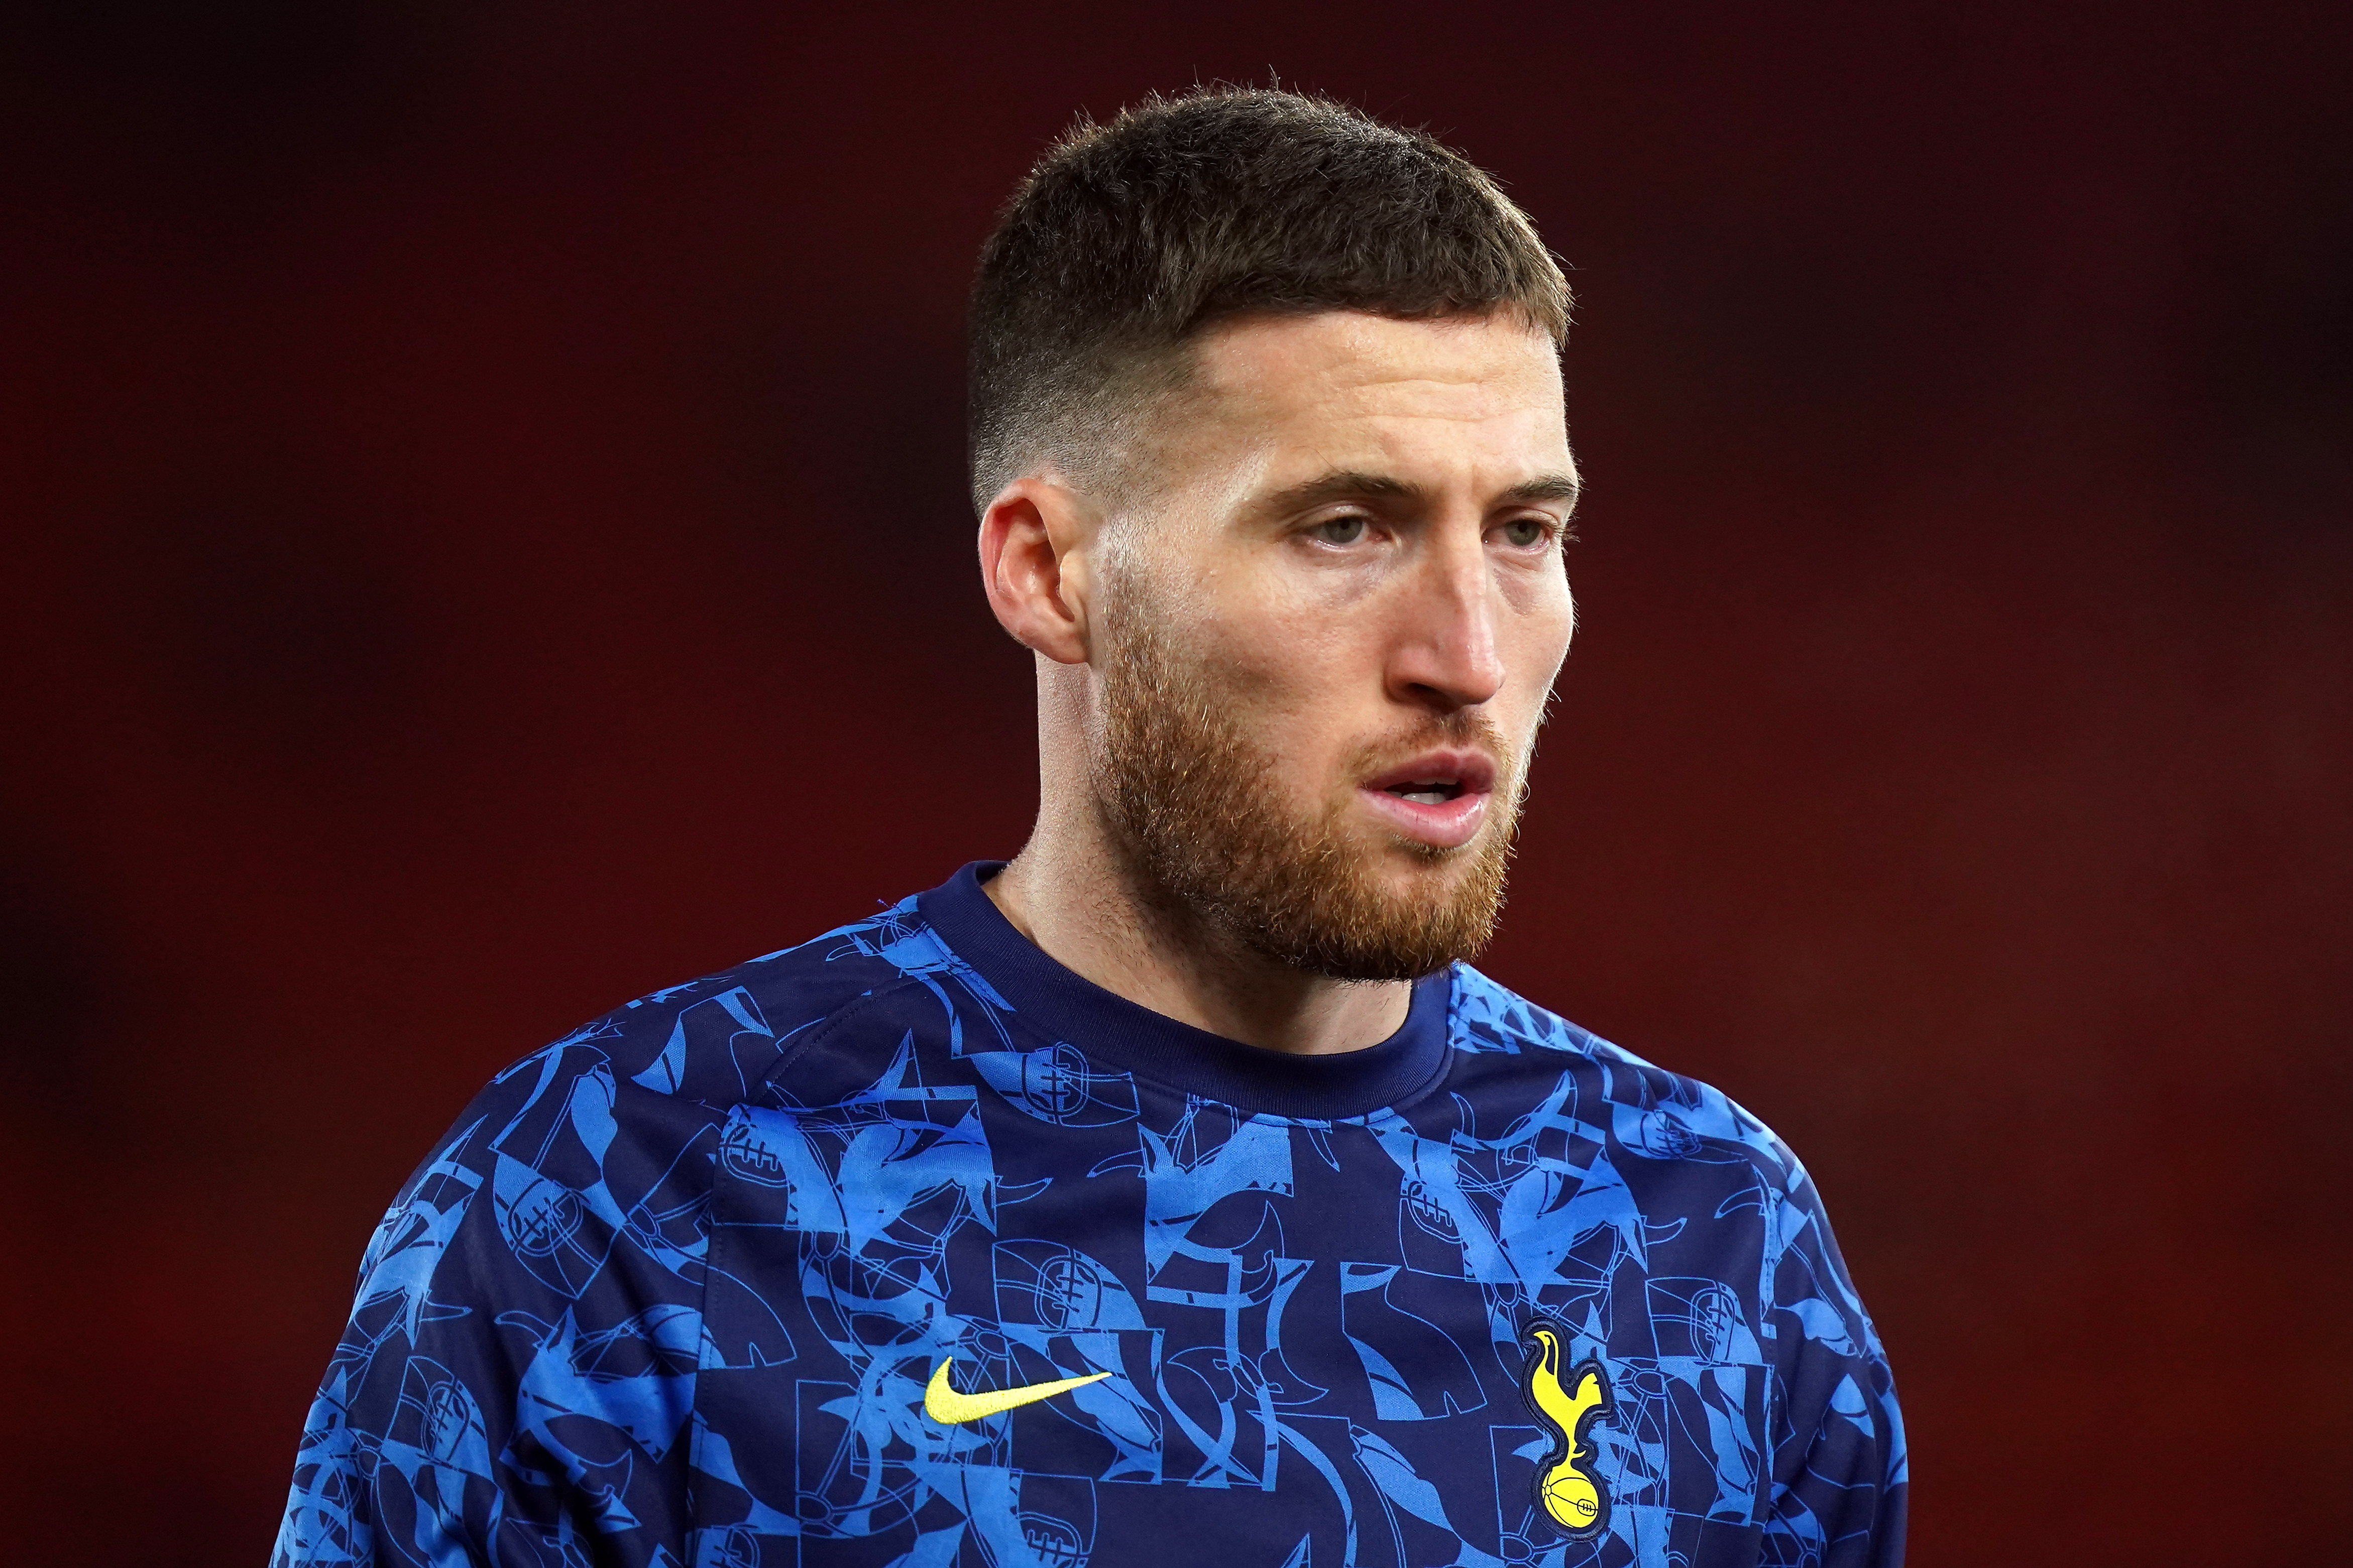 Tottenham Hotspur’s Matt Doherty warming up prior to kick-off before the Emirates FA Cup fifth round match at the Riverside Stadium, Middlesbrough. Picture date: Tuesday March 1, 2022